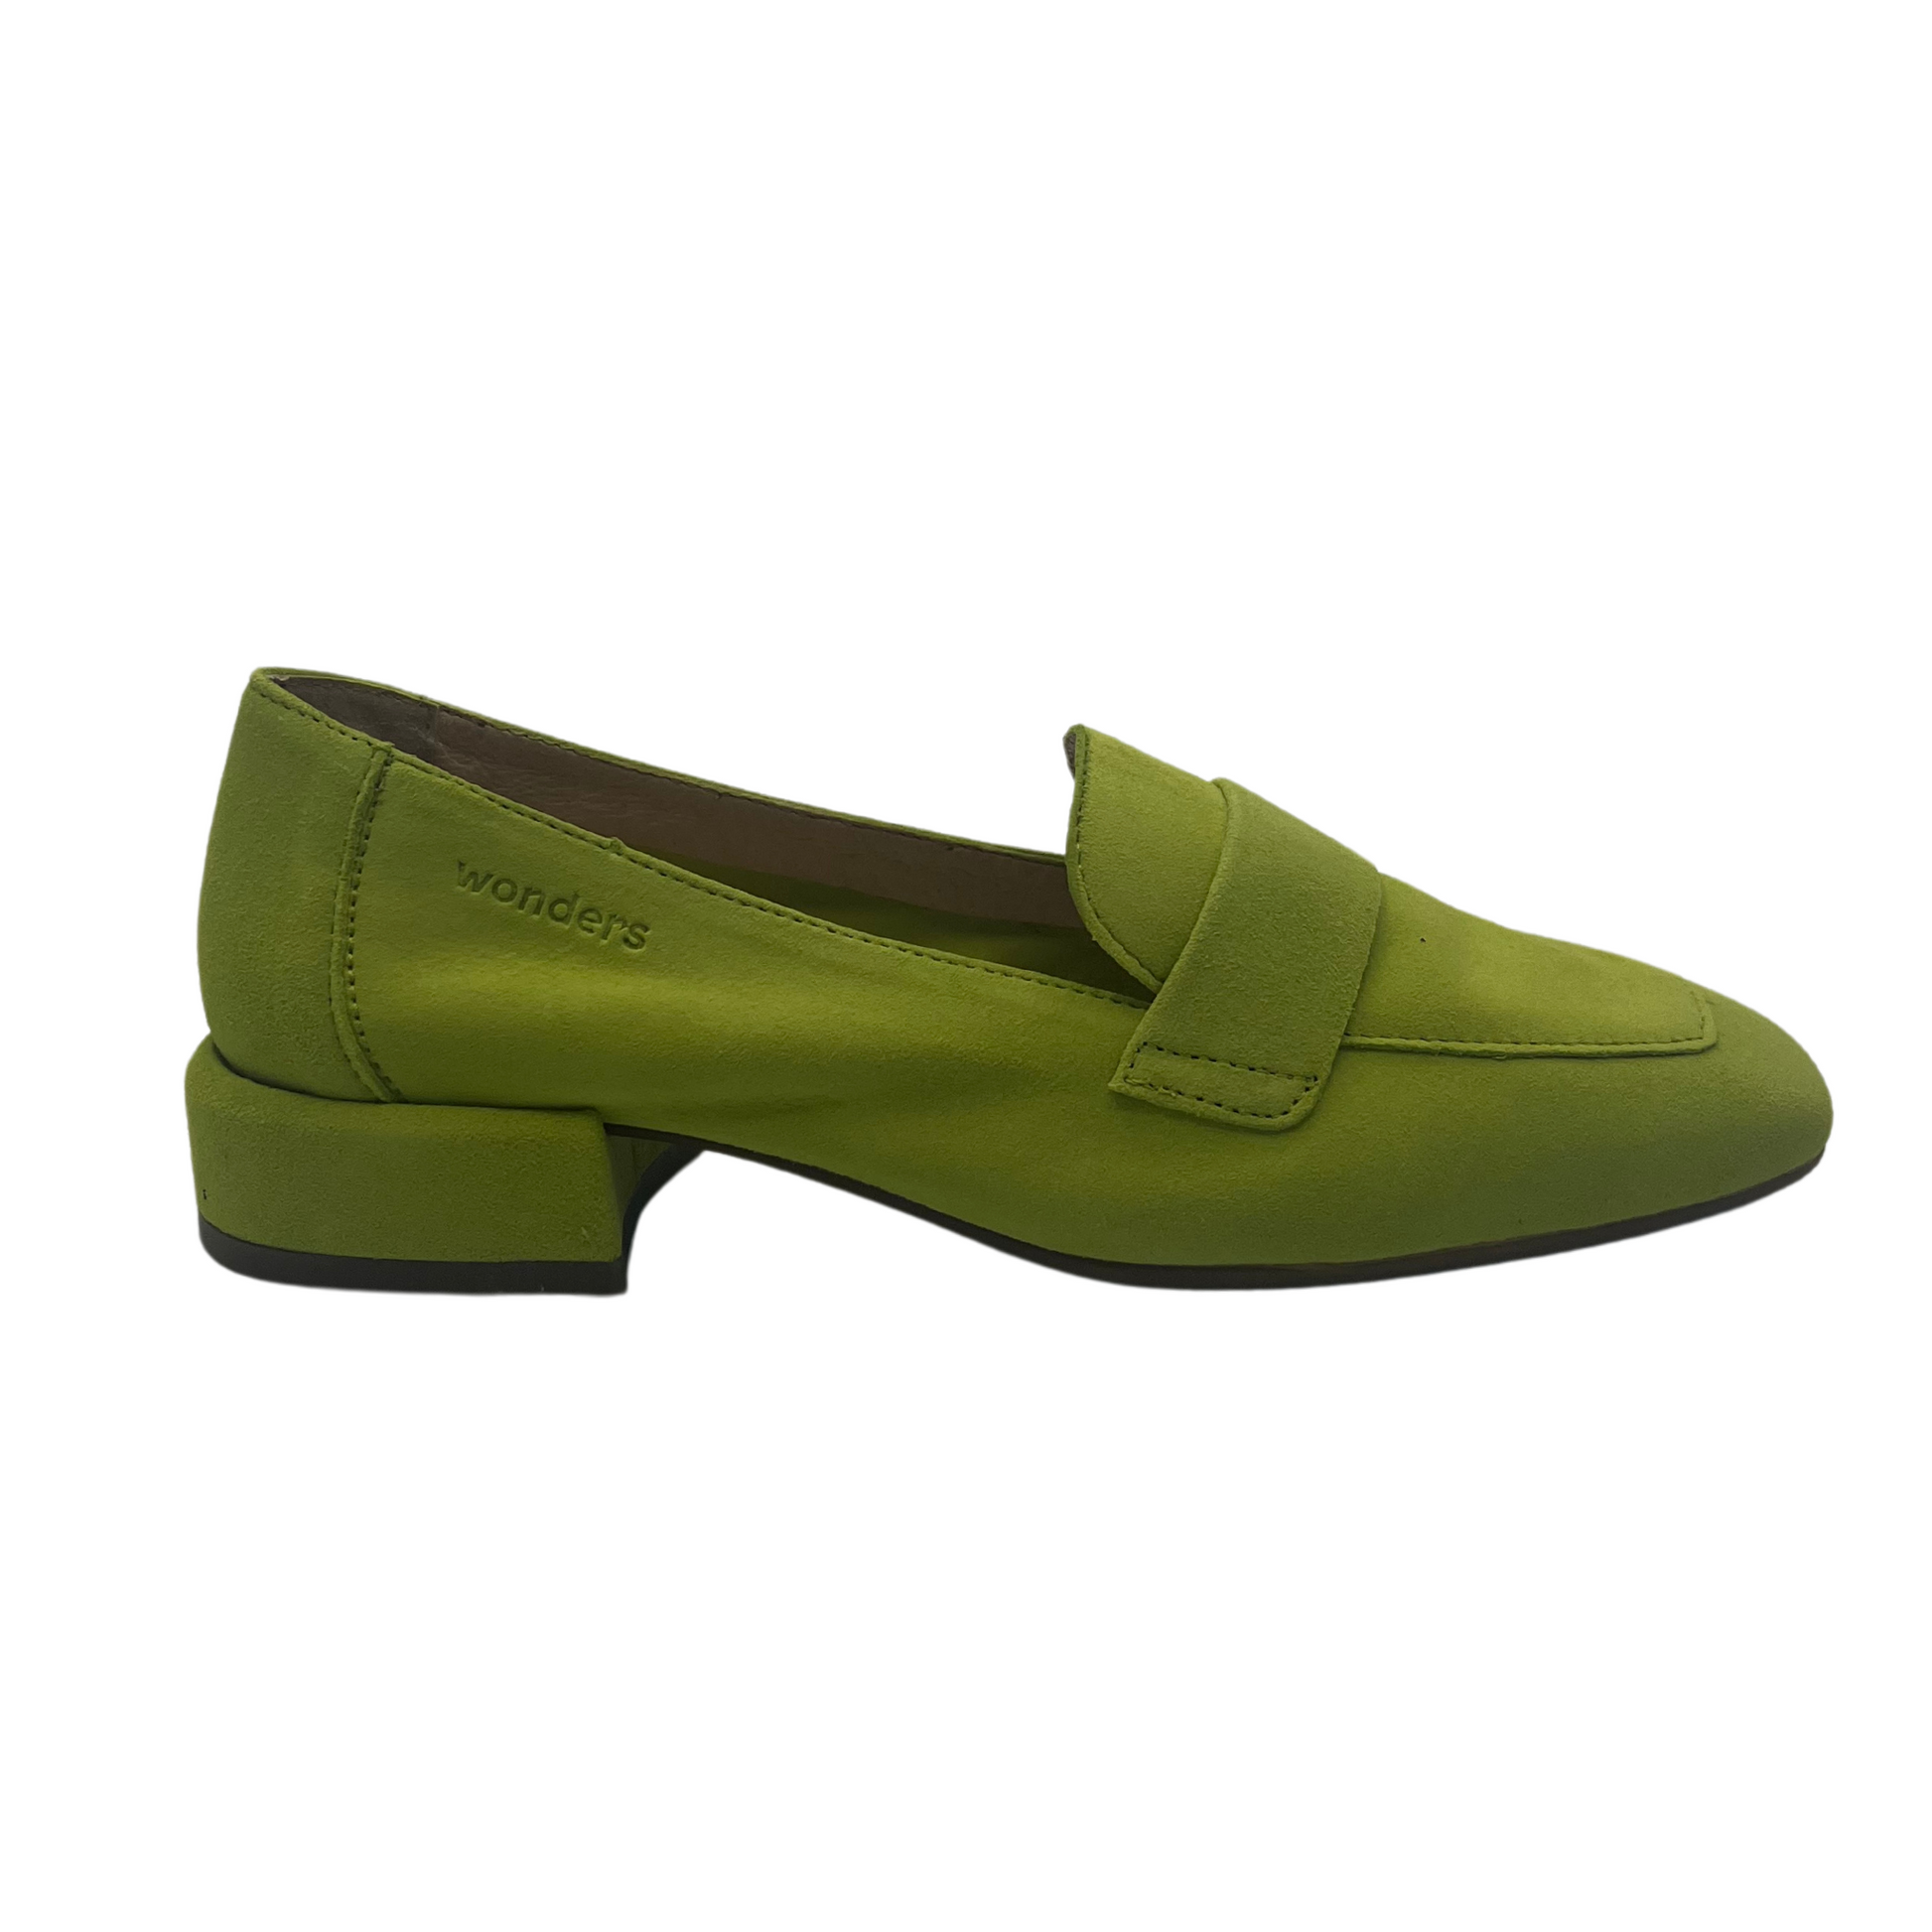 Right facing view of apple green suede leather loafer with short block heel